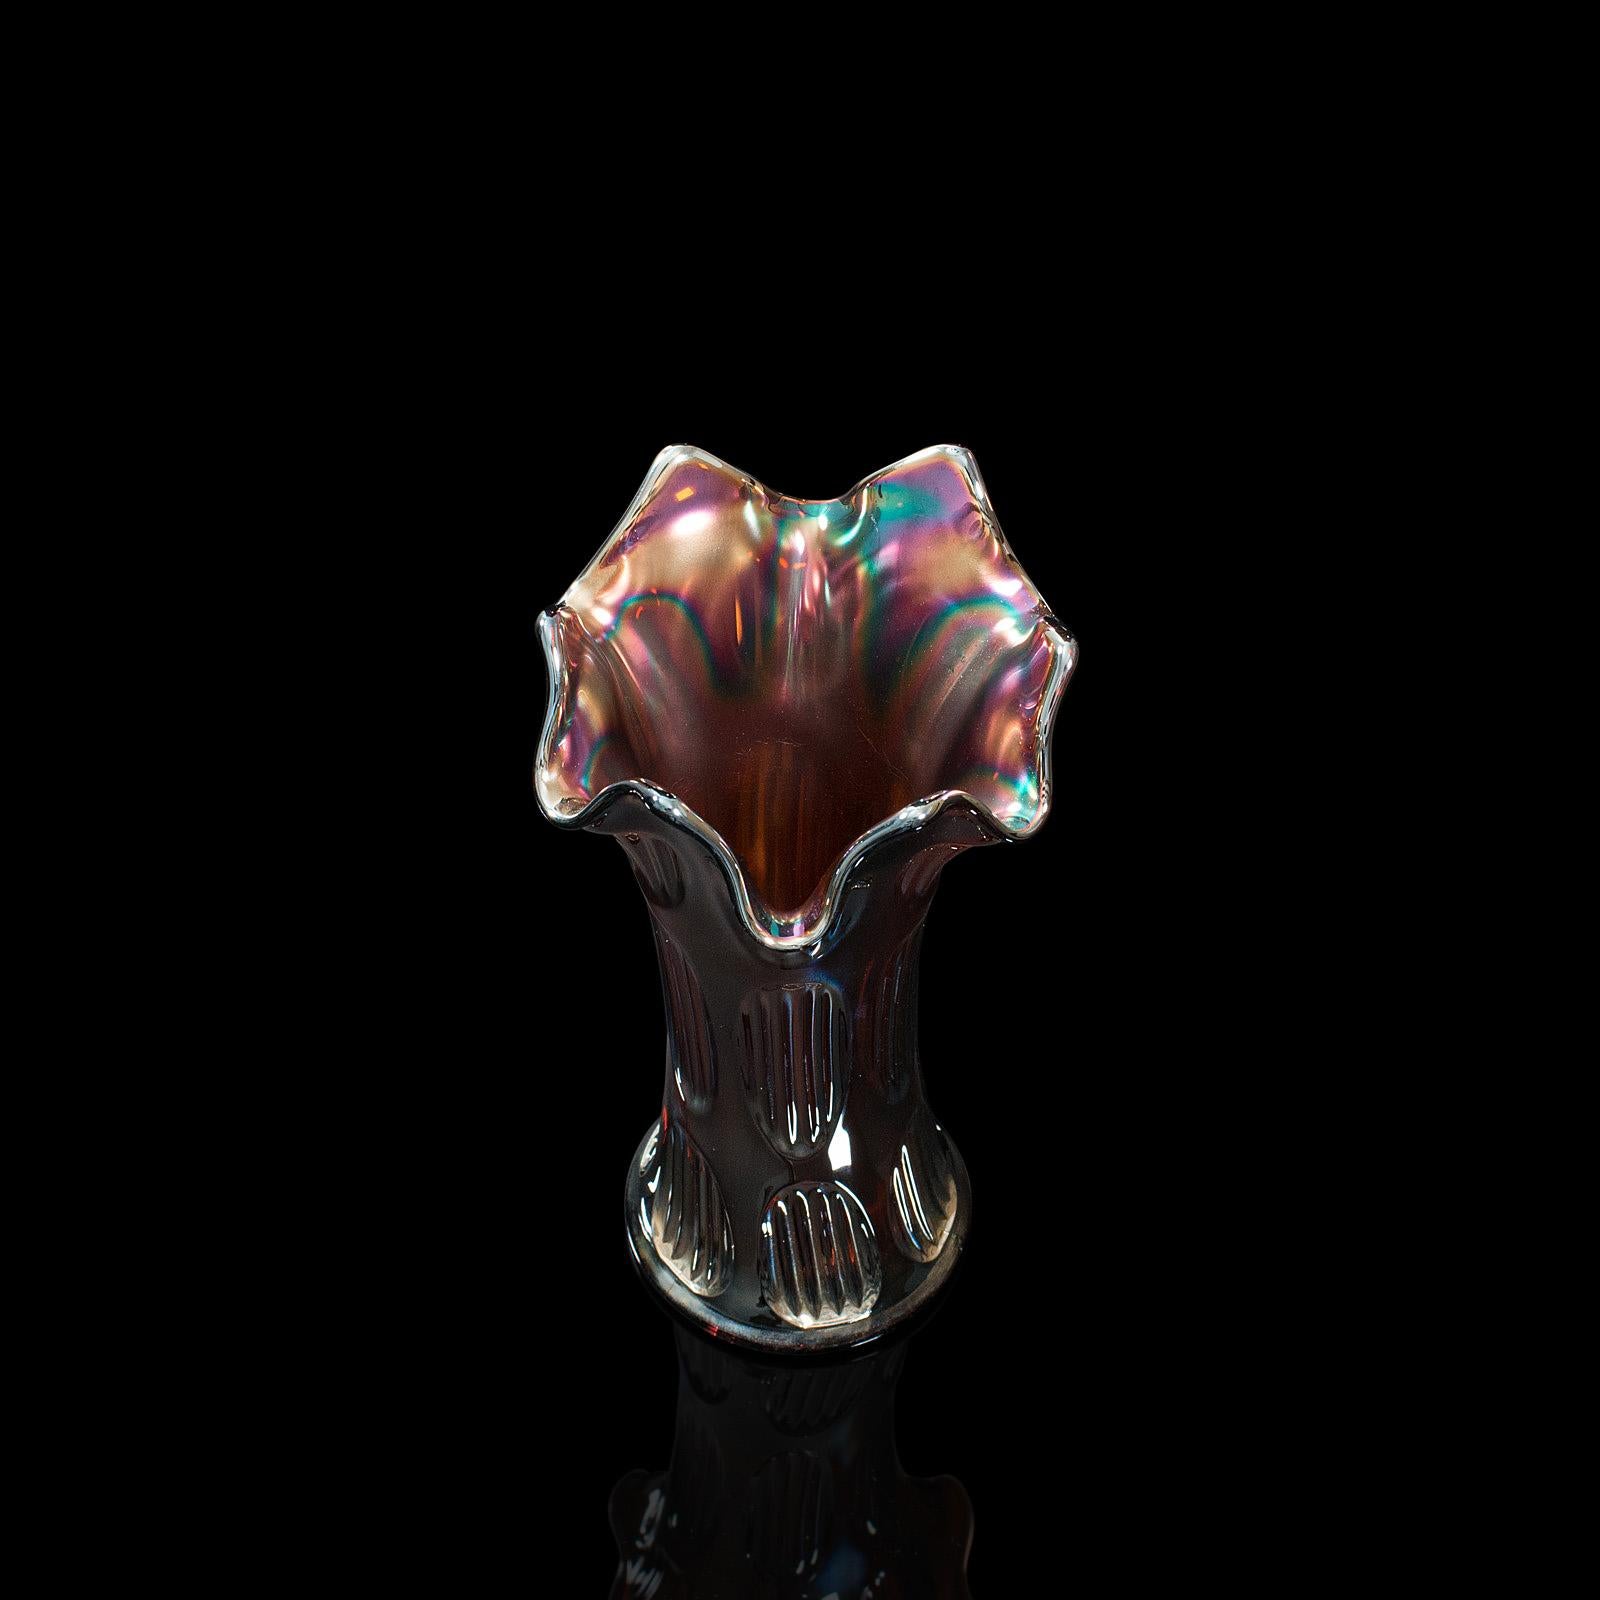 Small Vintage Decorative Vase, English, Carnival Glass, Flower, Mid 20th, C.1940 In Good Condition For Sale In Hele, Devon, GB